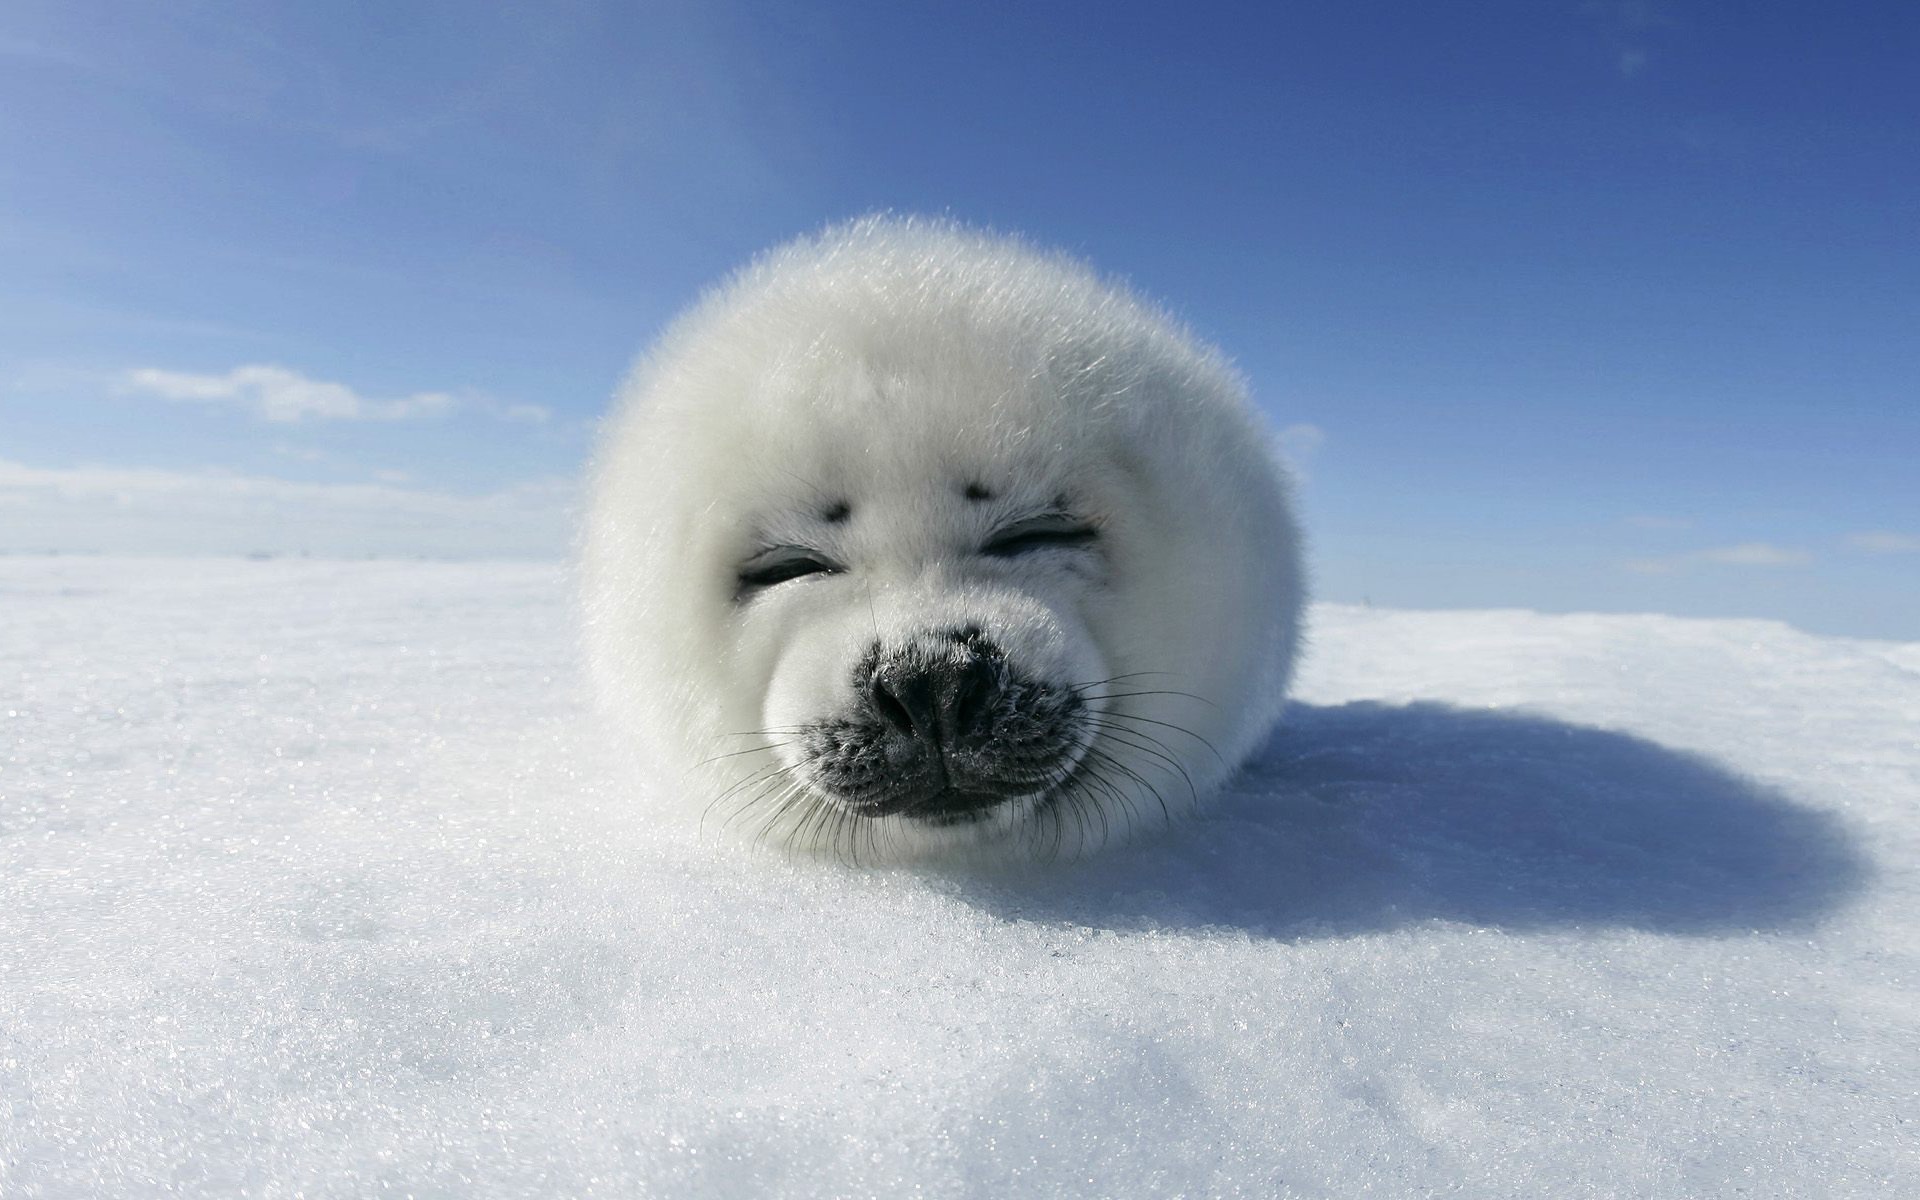 Fluffy in the Arctic : aww